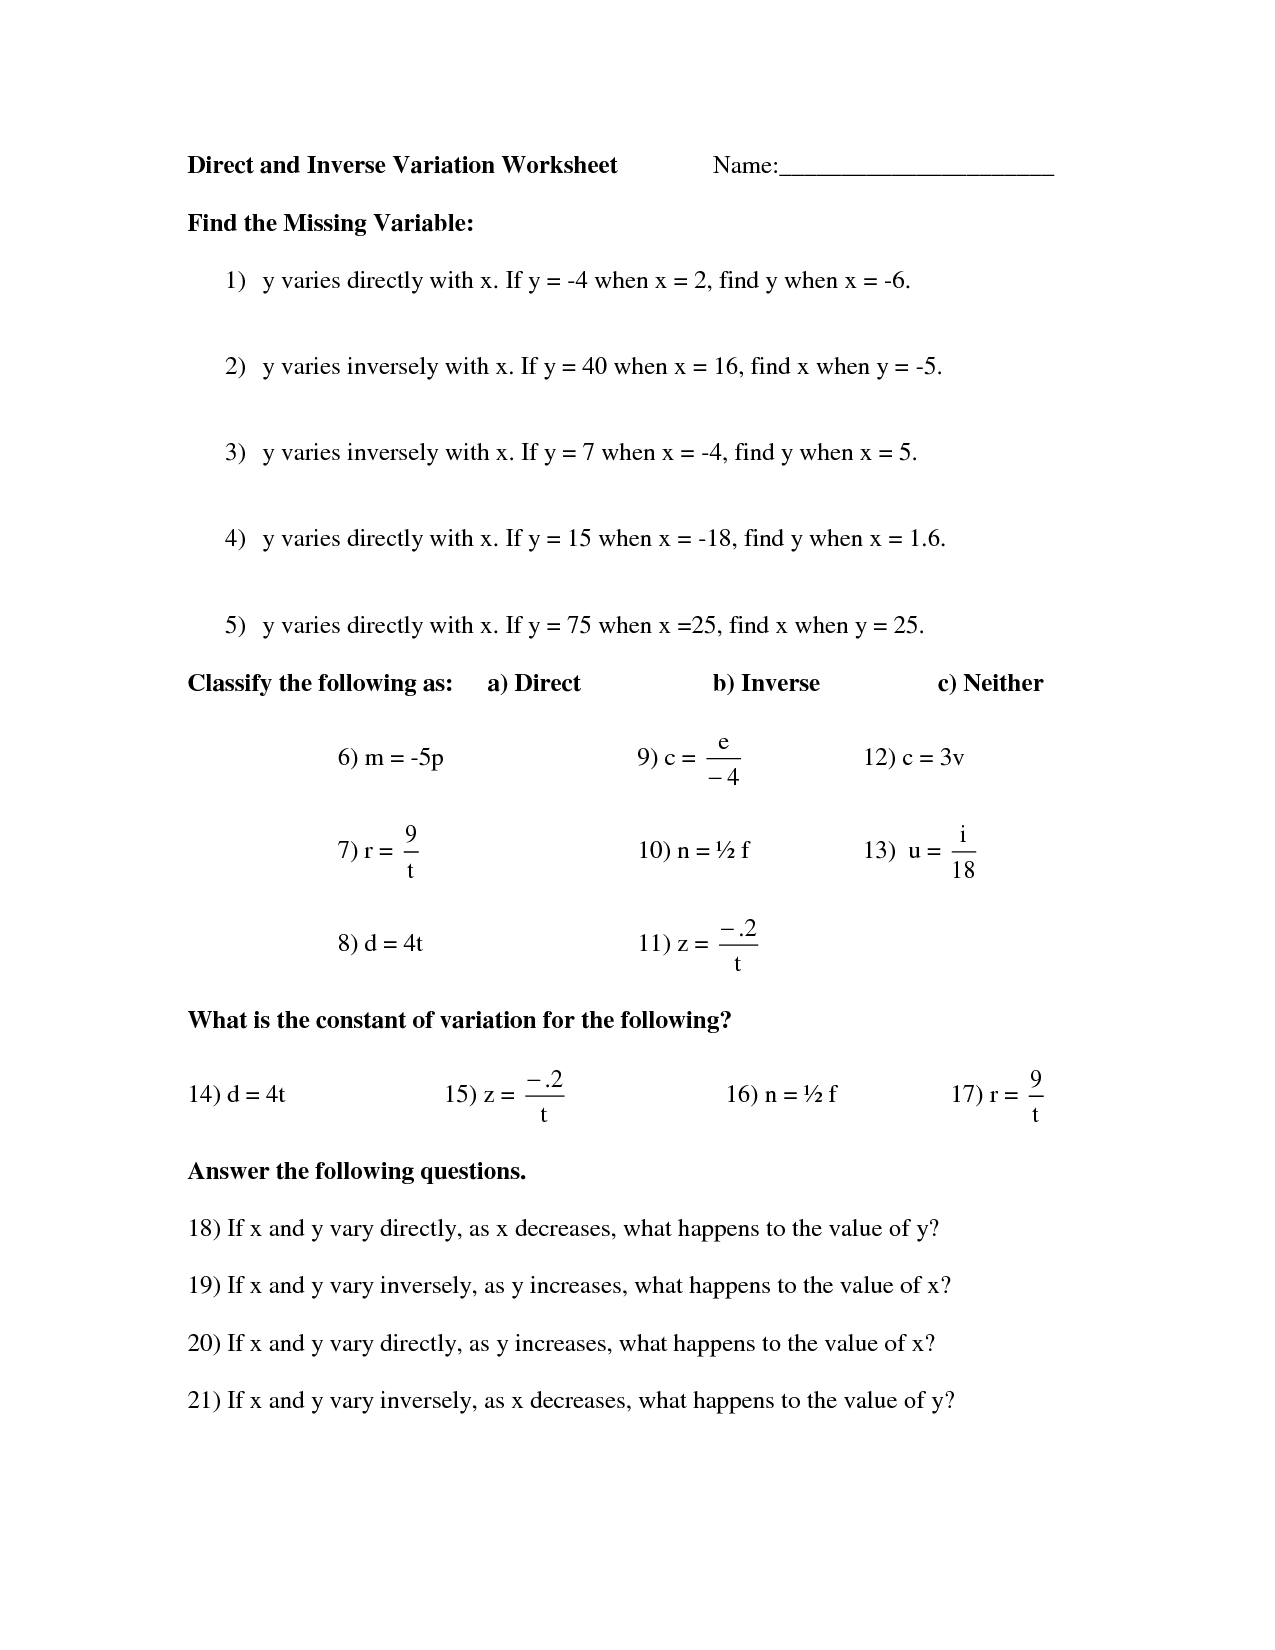 Direct and Inverse Variation Worksheet Answers